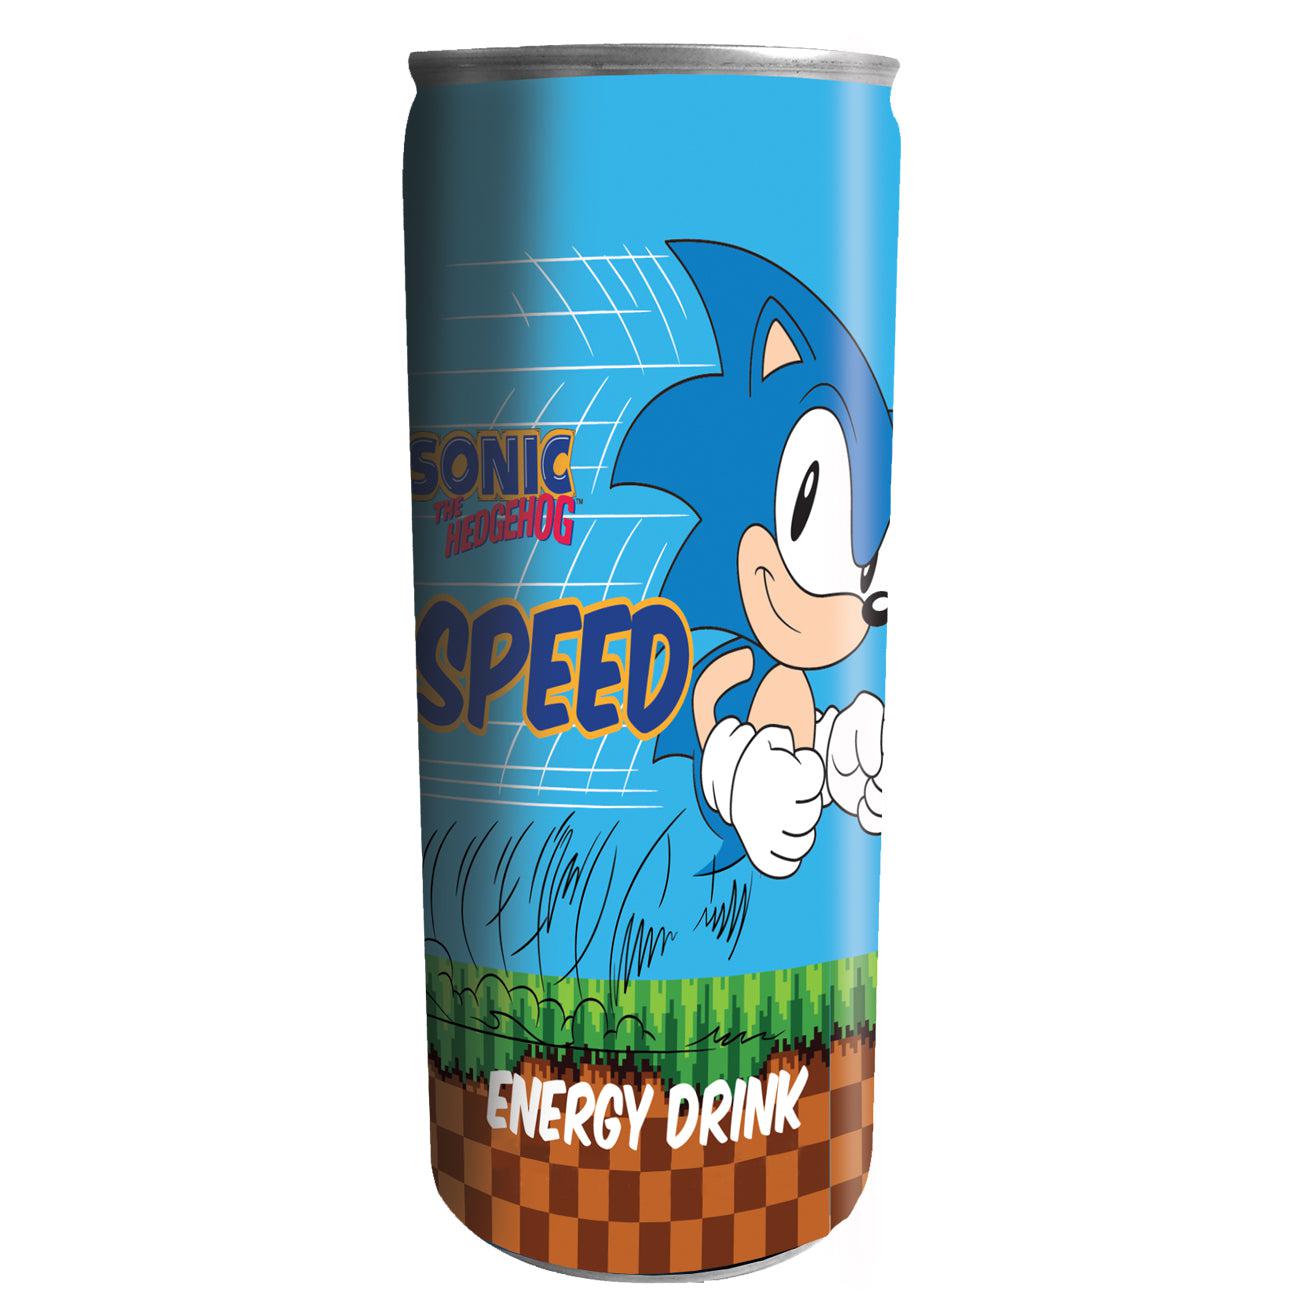 Sonic the Hedgehog Speed 12oz Energy Drink, 1 Can